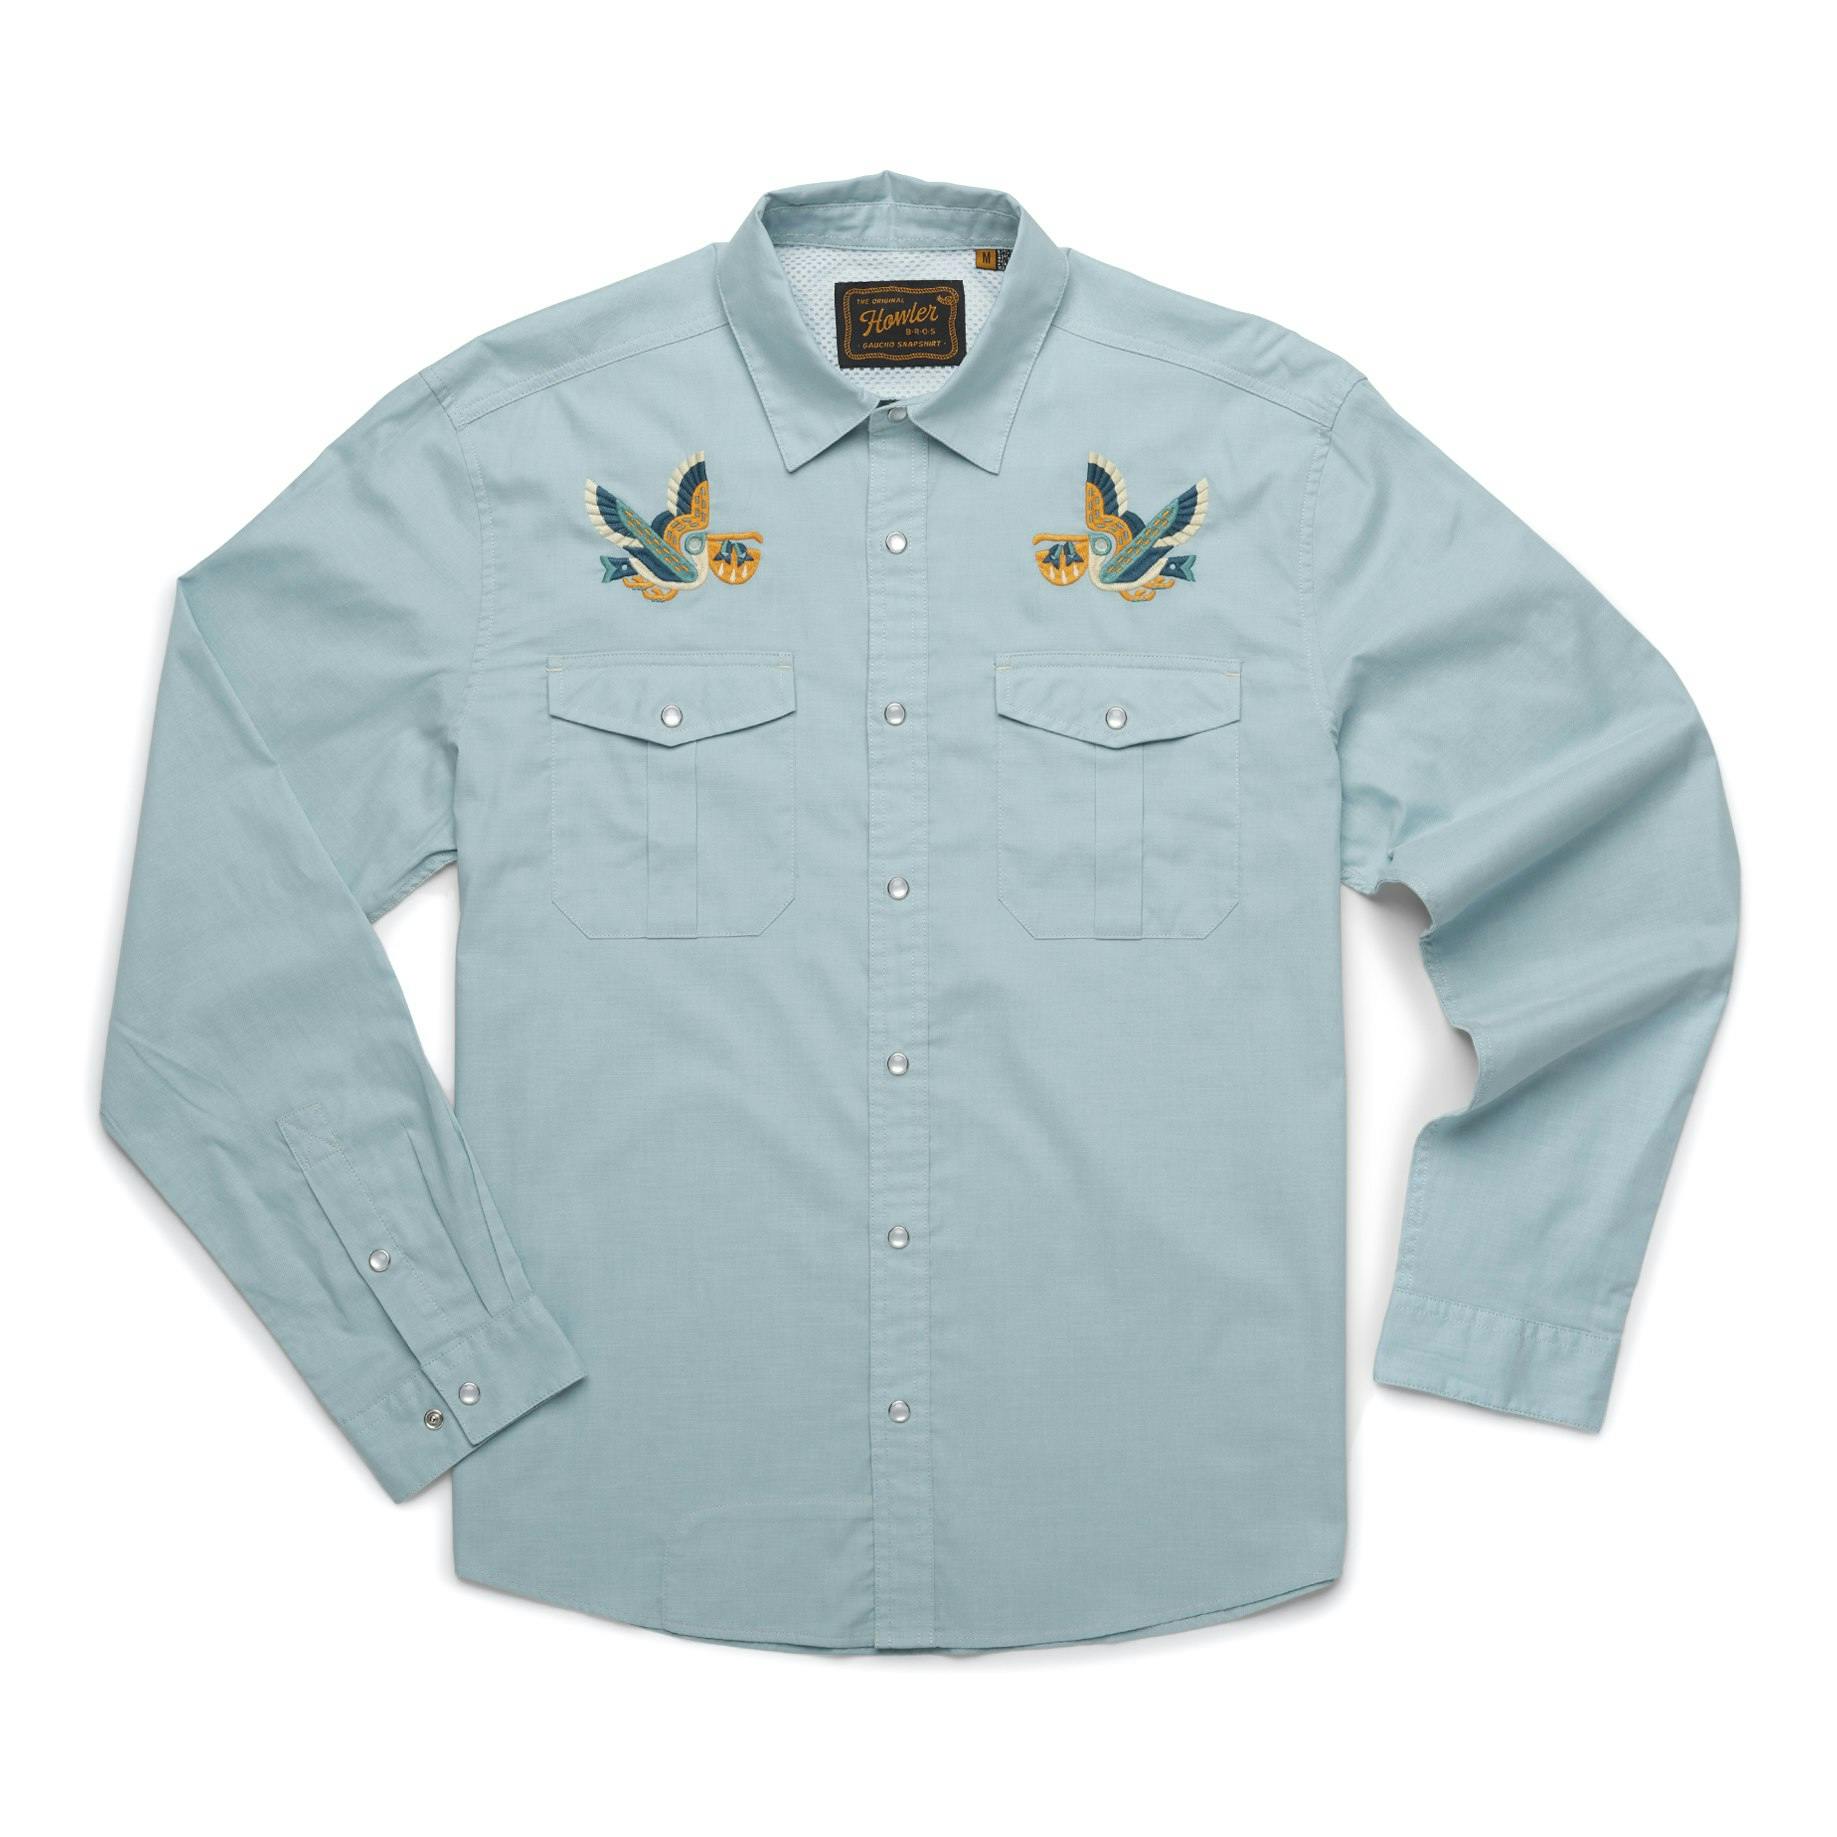 Howler Brothers Gaucho Snapshirt - Pelican Portage: Nile Blue Oxford, Long  Sleeve Shirts